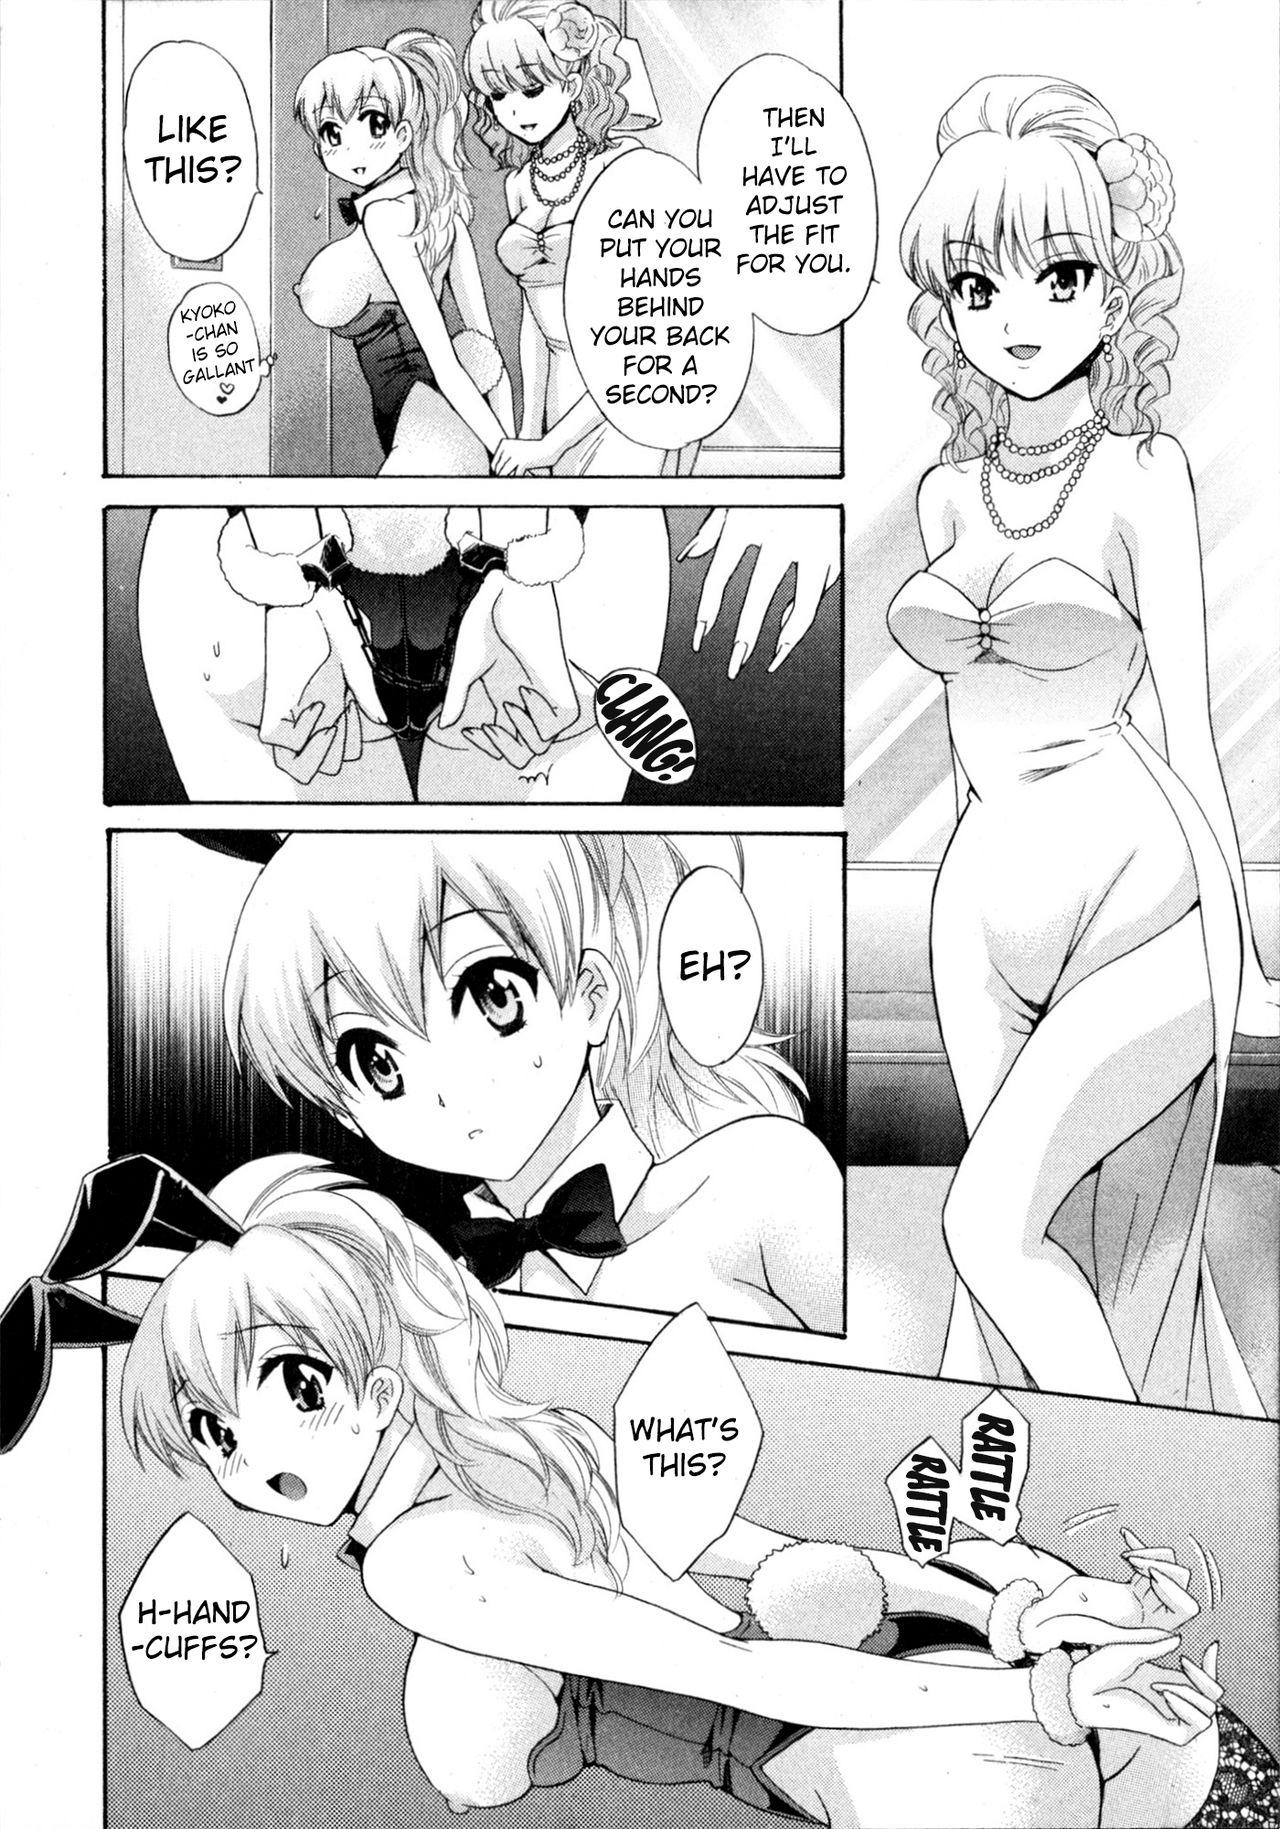 Wank Tenshi no Marshmallow 4 Ch. 25-27 Pigtails - Page 10